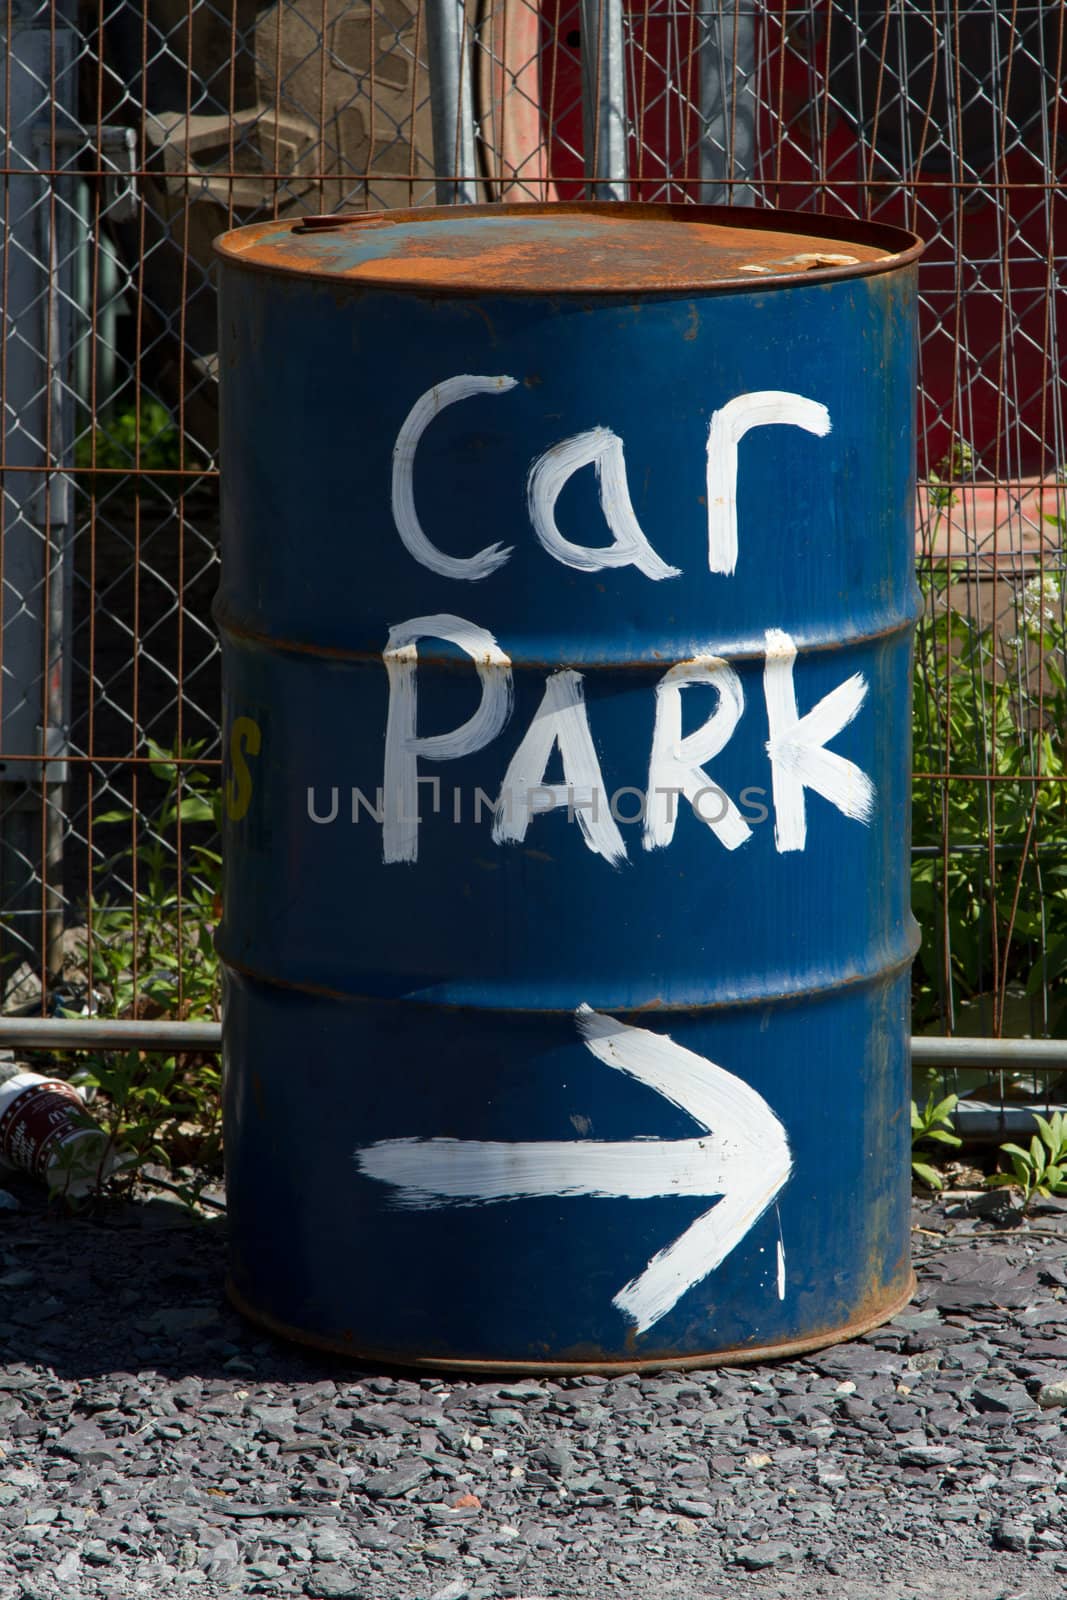 Car park sign. by richsouthwales